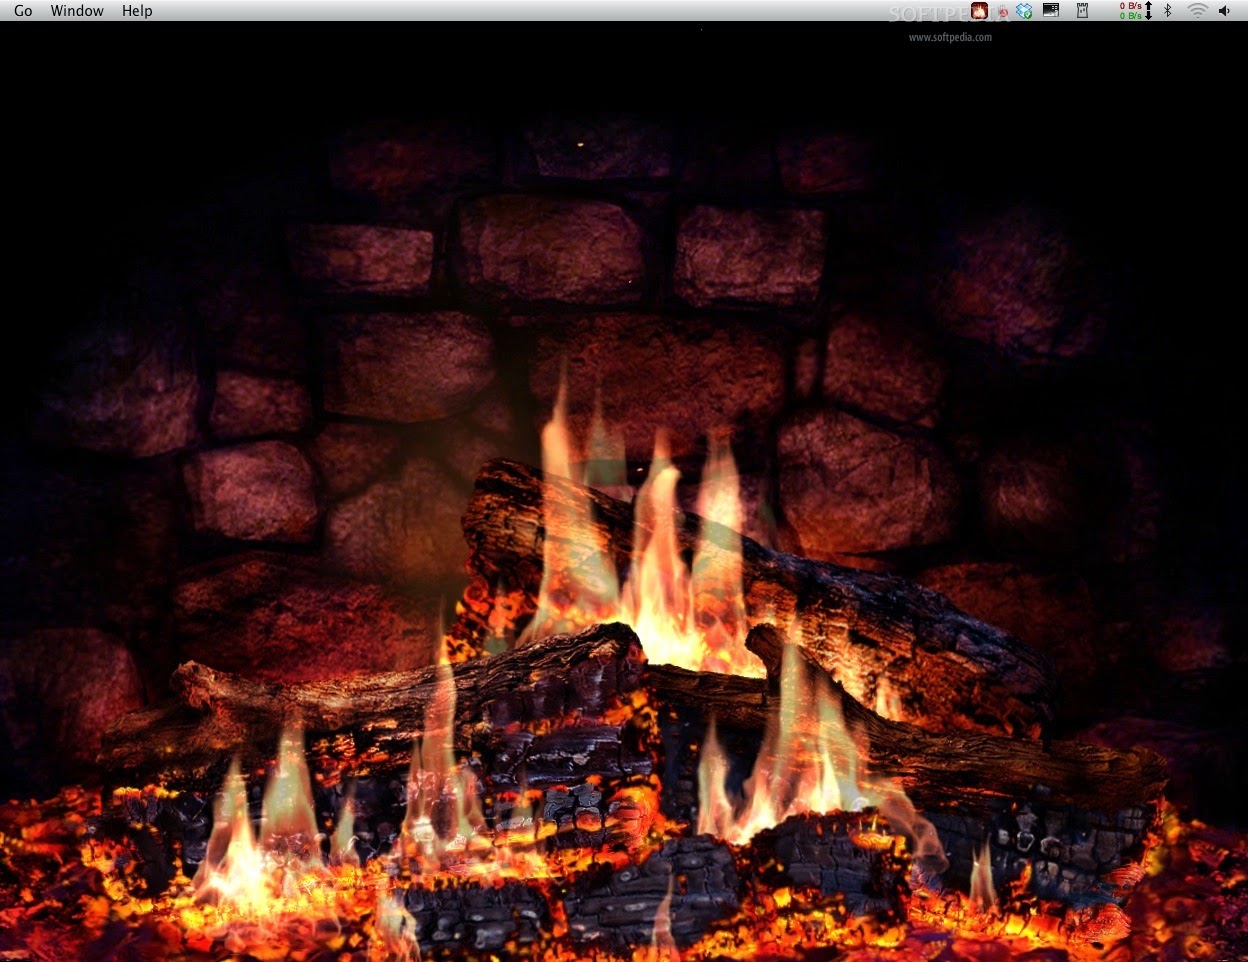 Animated Fireplace Wallpaper